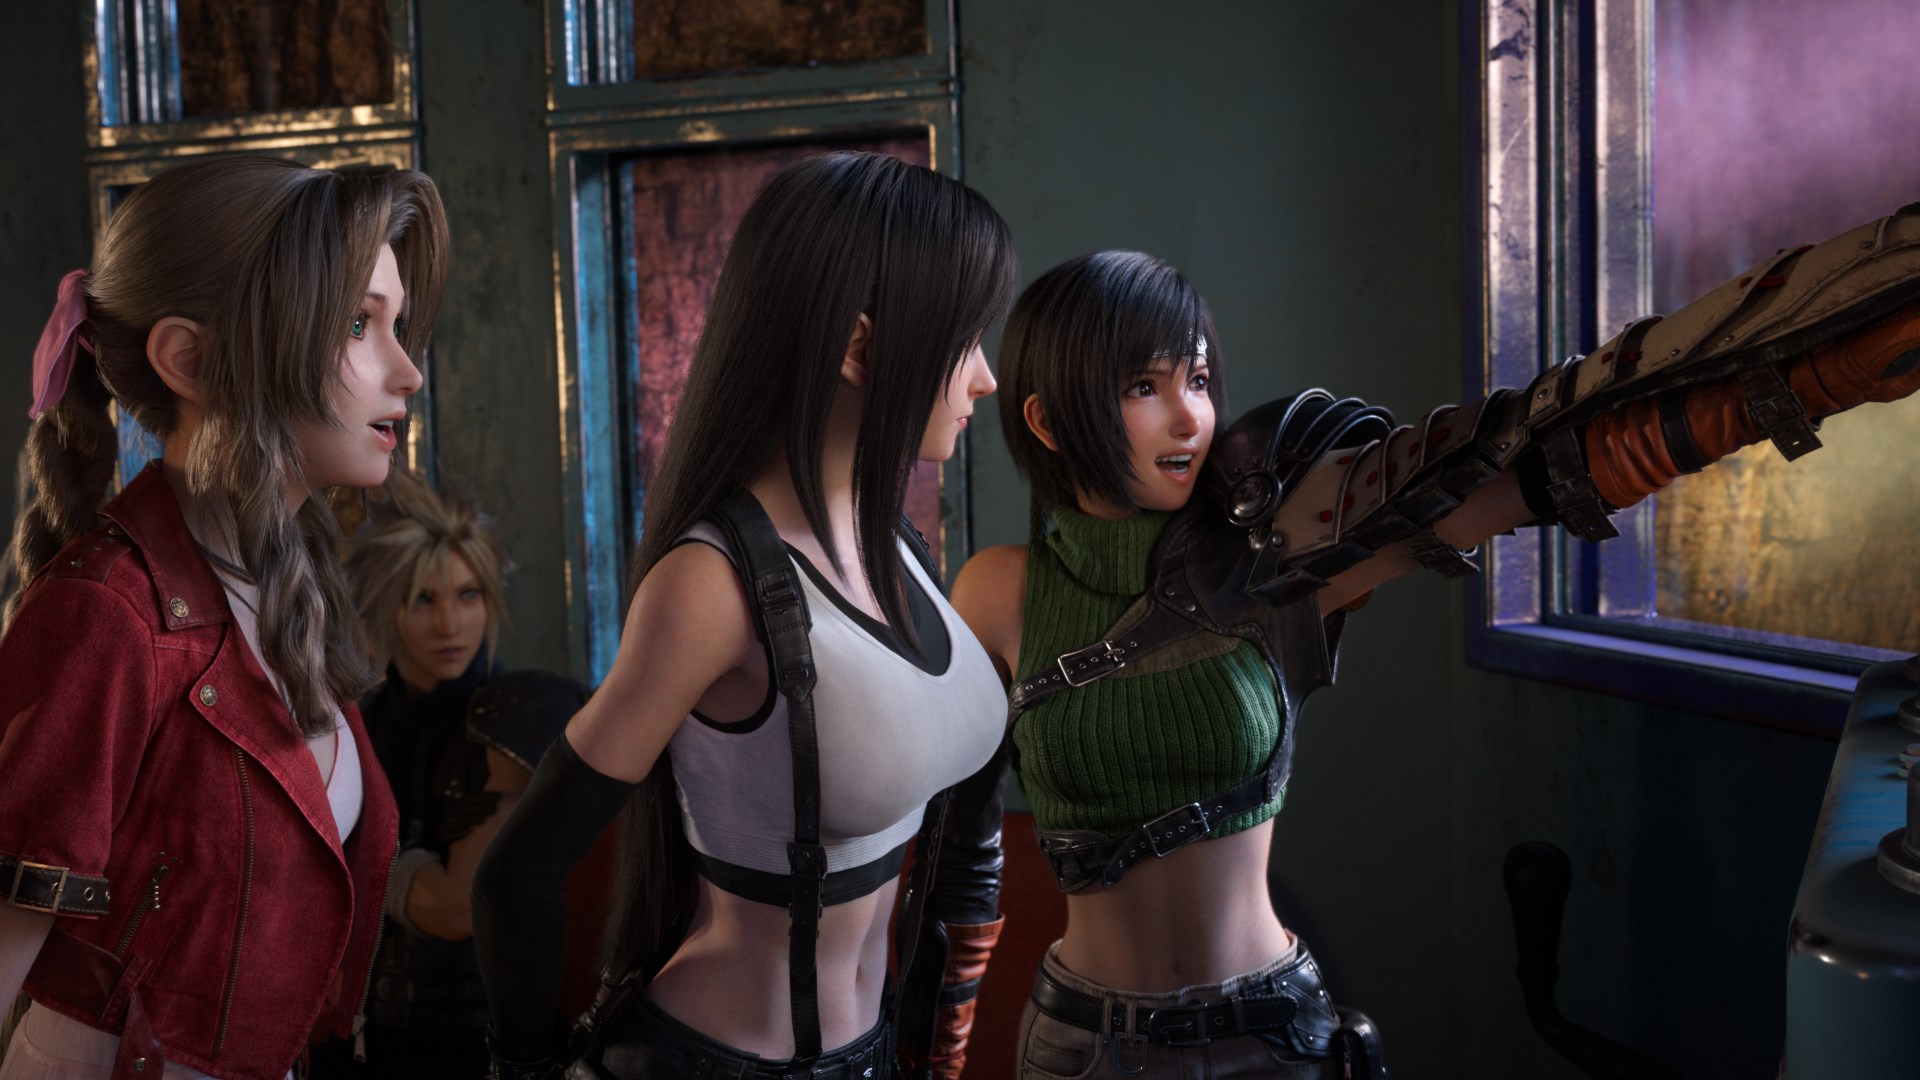 Are there Final Fantasy 7 Remake PS5 and Xbox Series X release